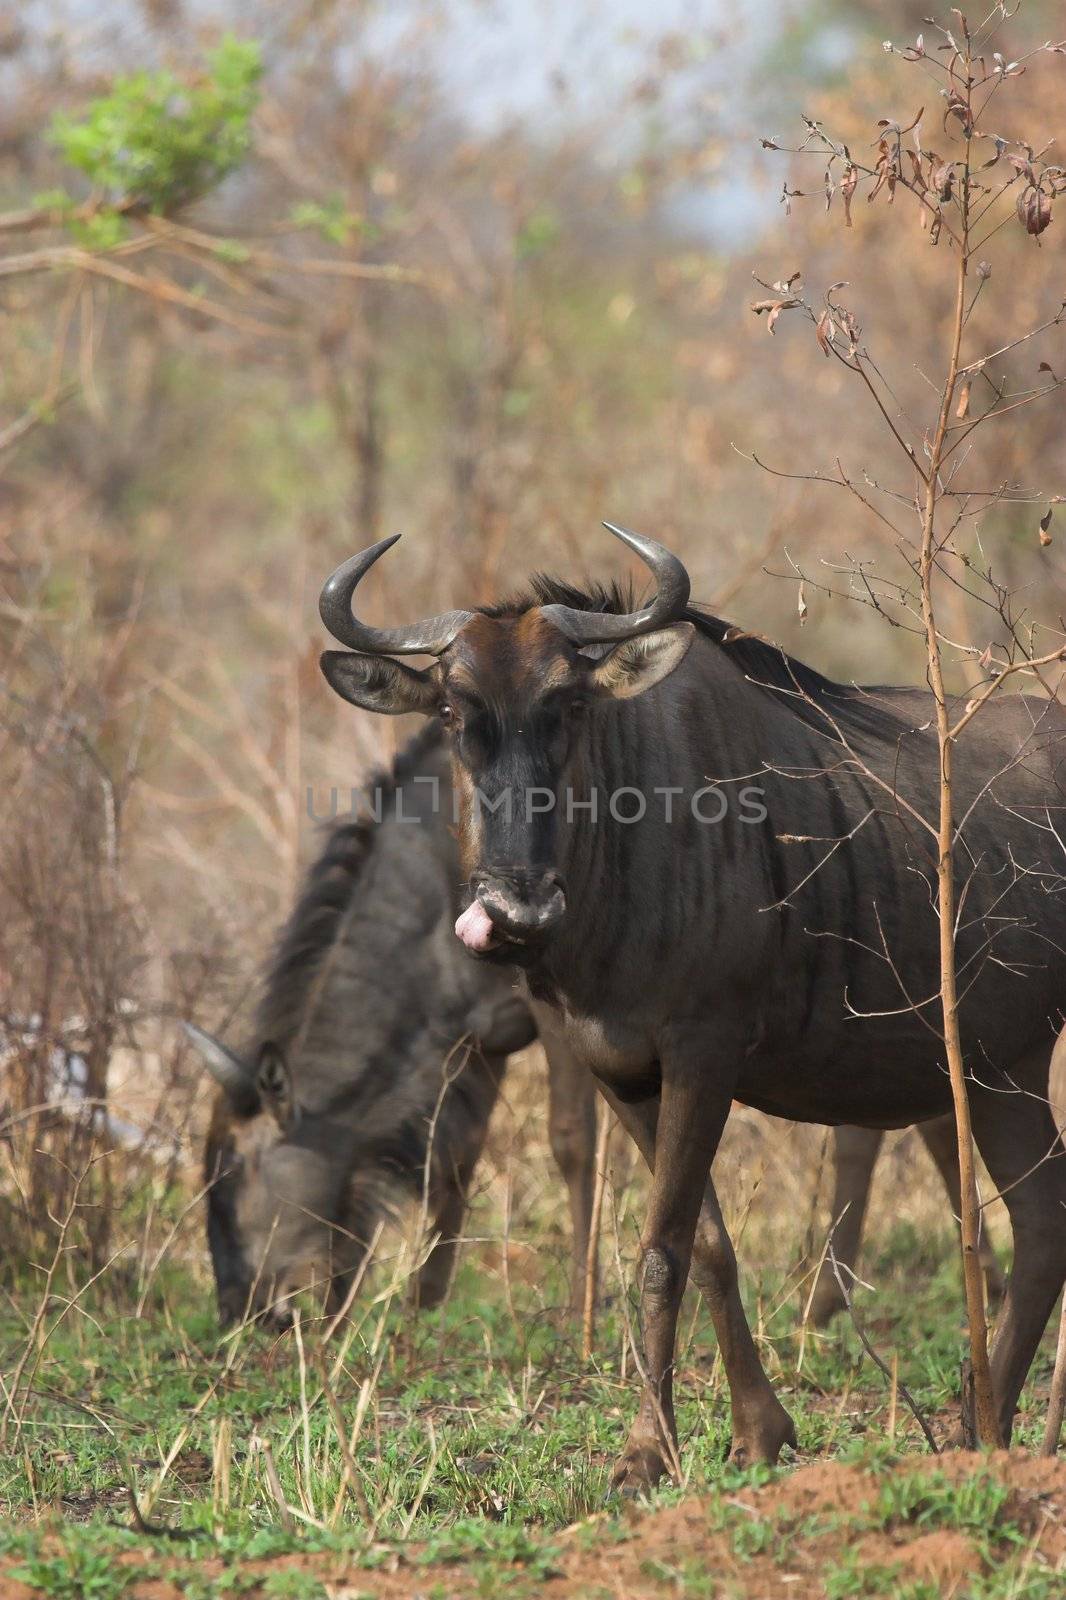 Blue Wildebeest cleaning its nostril with its tongue